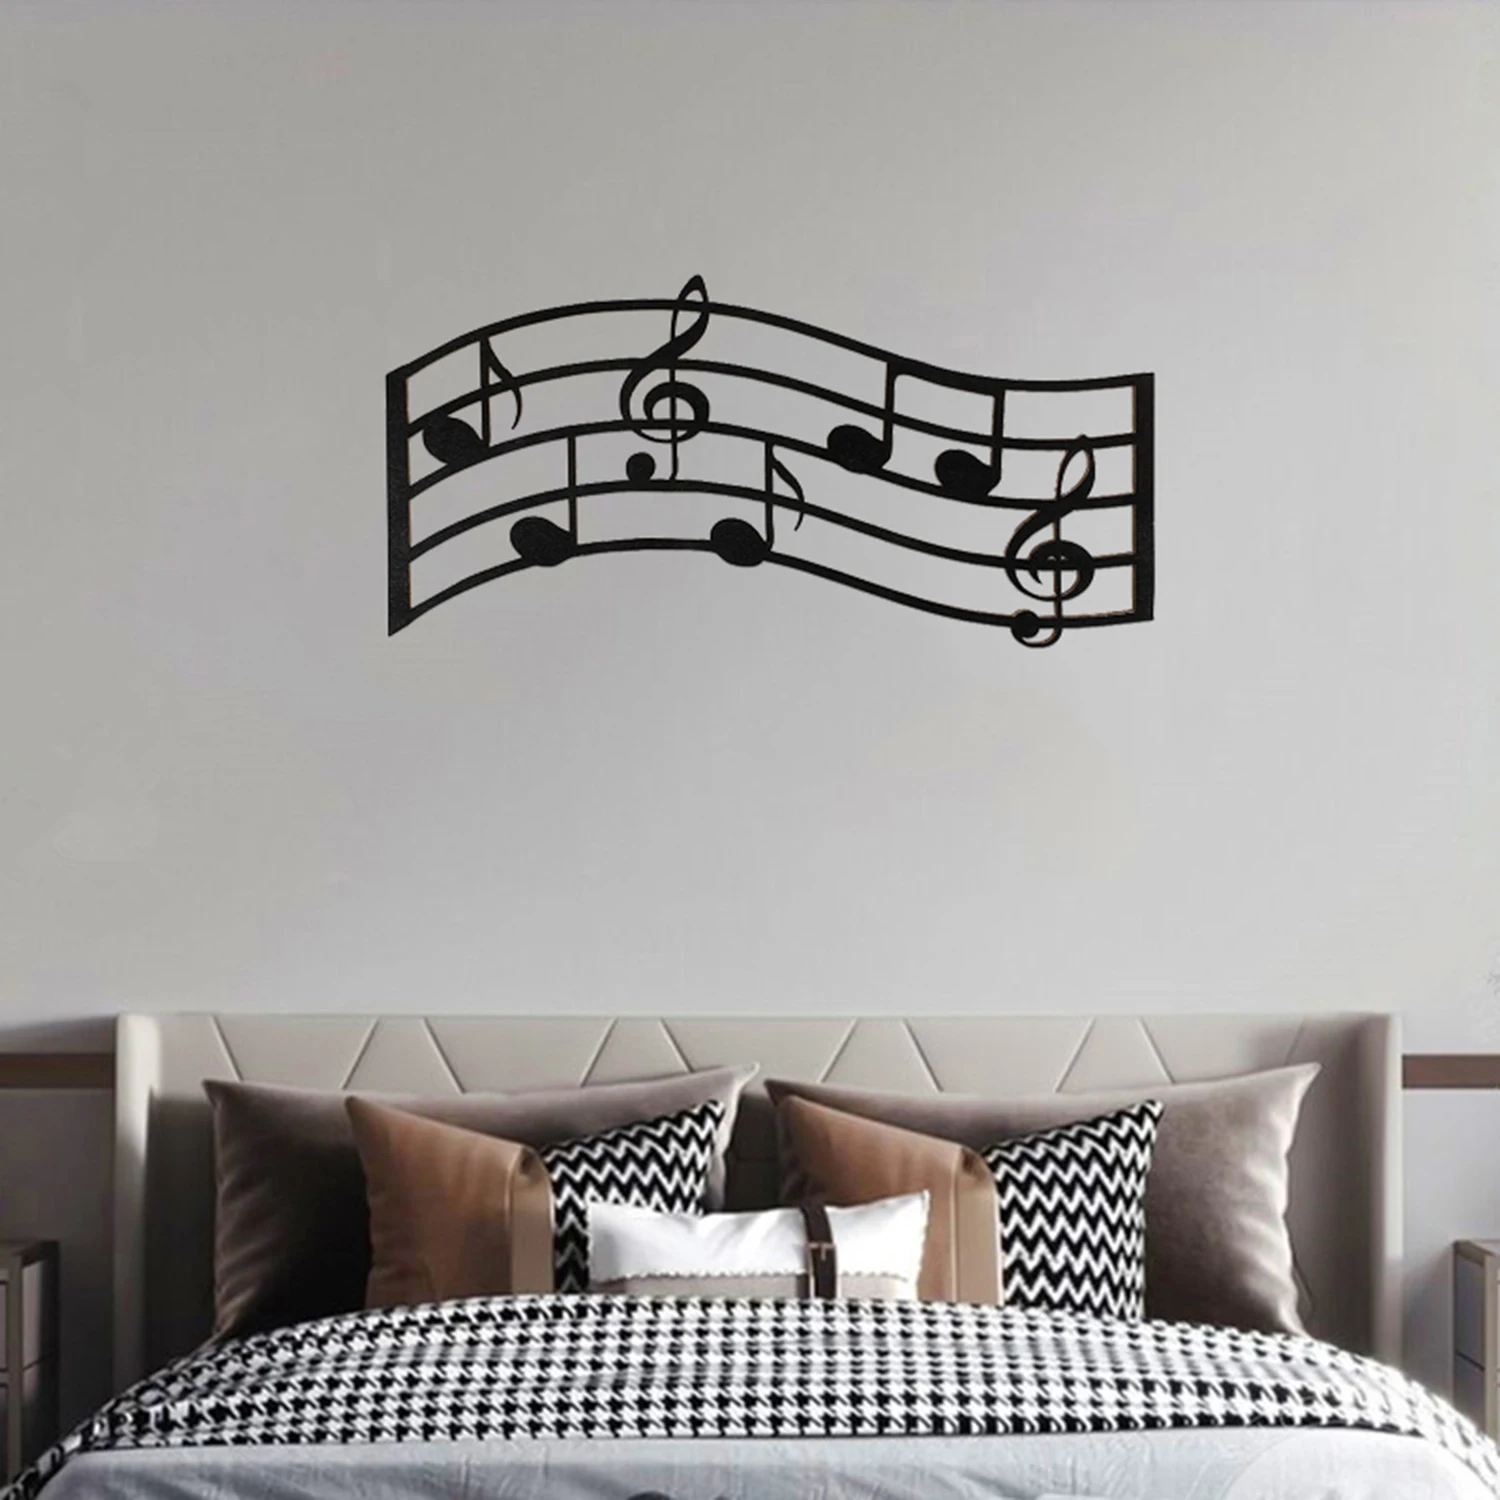 

Black Metal Wall Decoration Music Notes Silhouette Artwork Wall Sign Vintage Hanging Wall Living Room Bedroom Gallery Decoration